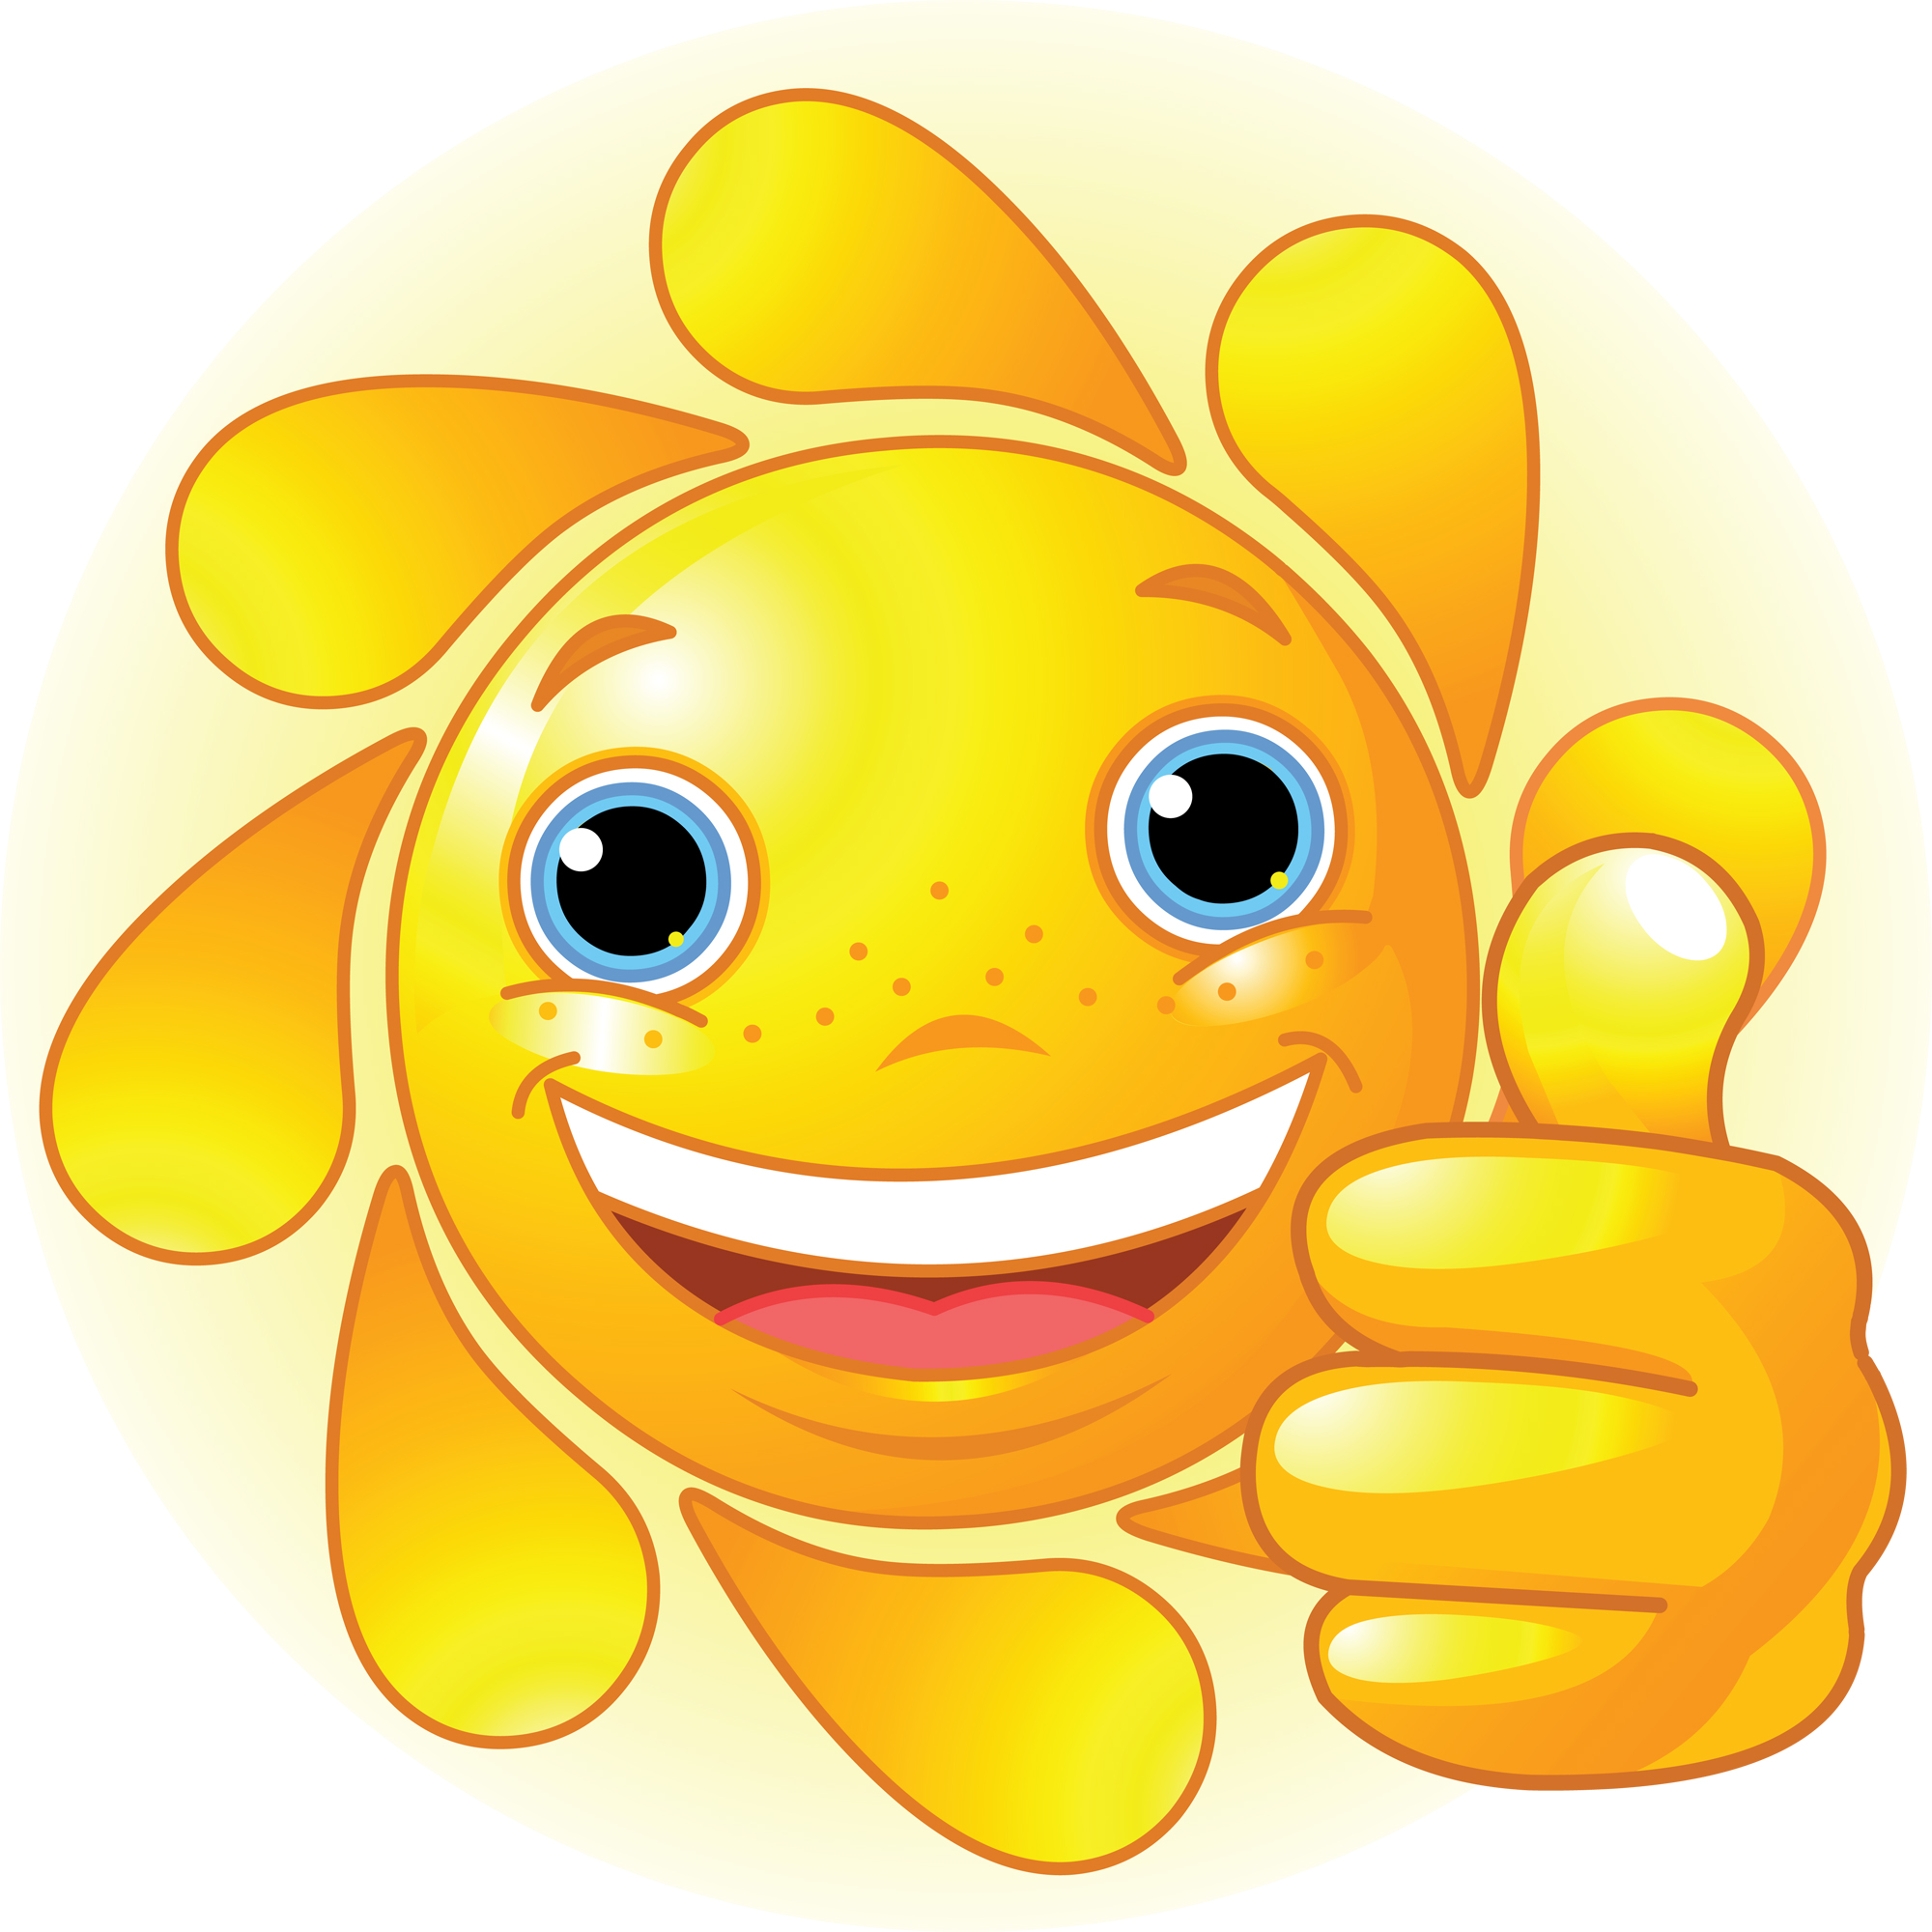 Smiling Sun Clip Art | Clipart library - Free Clipart Images